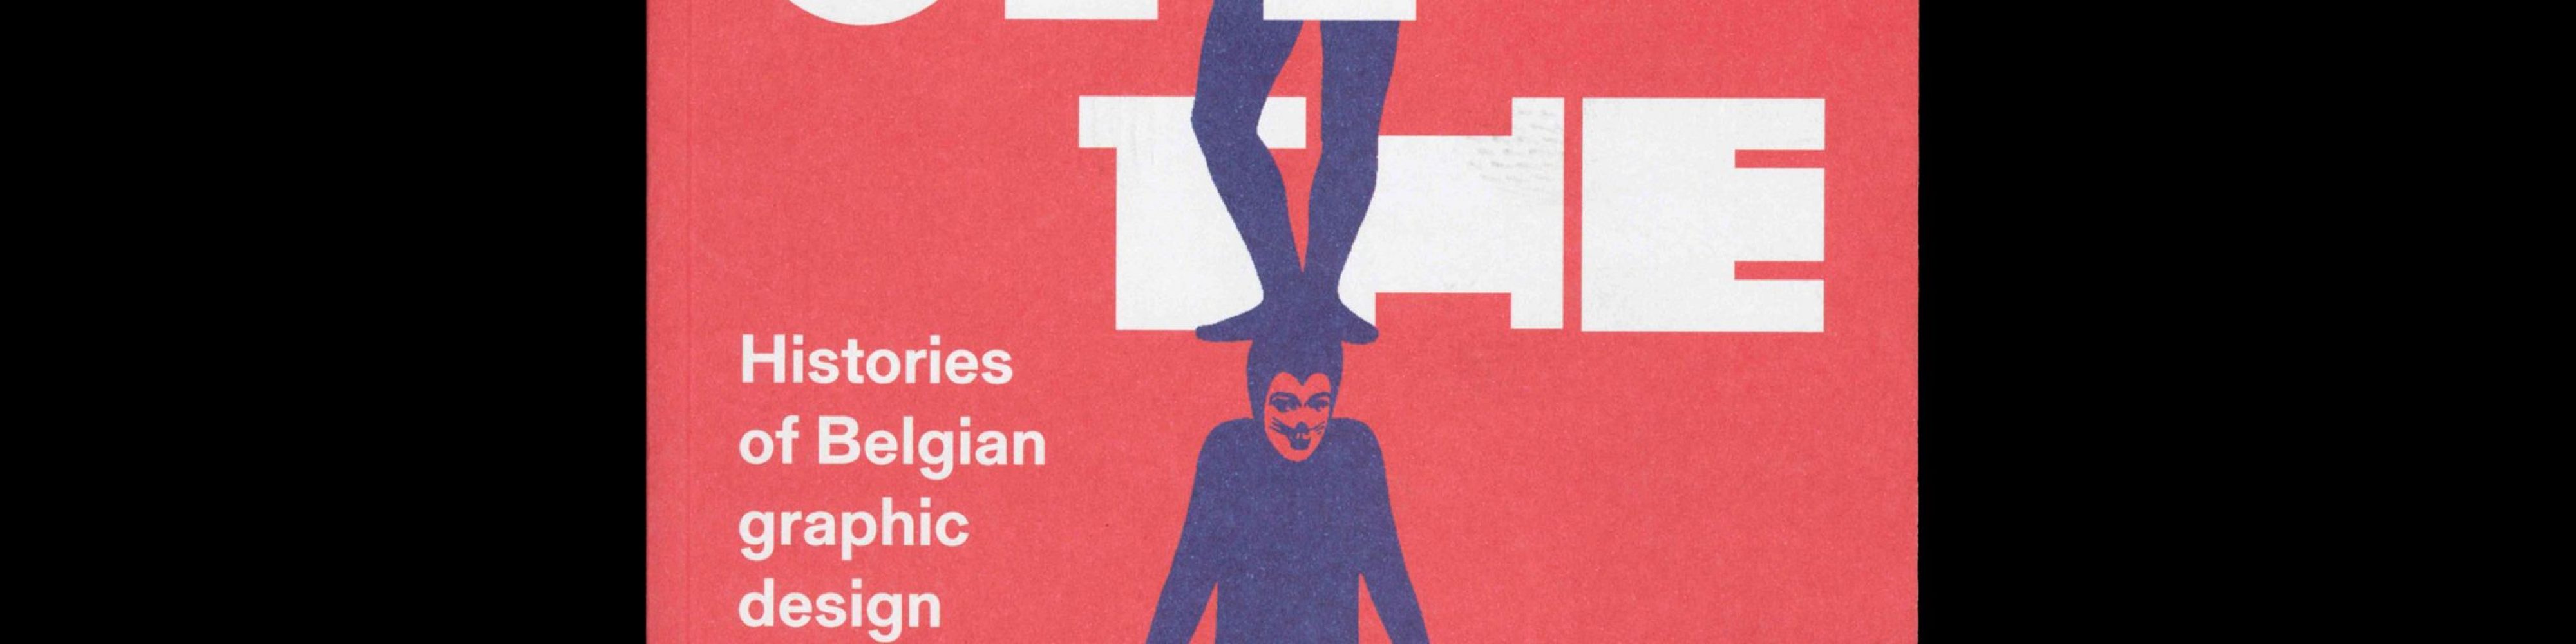 Off the Grid: Histories of Belgian graphic design, 2022